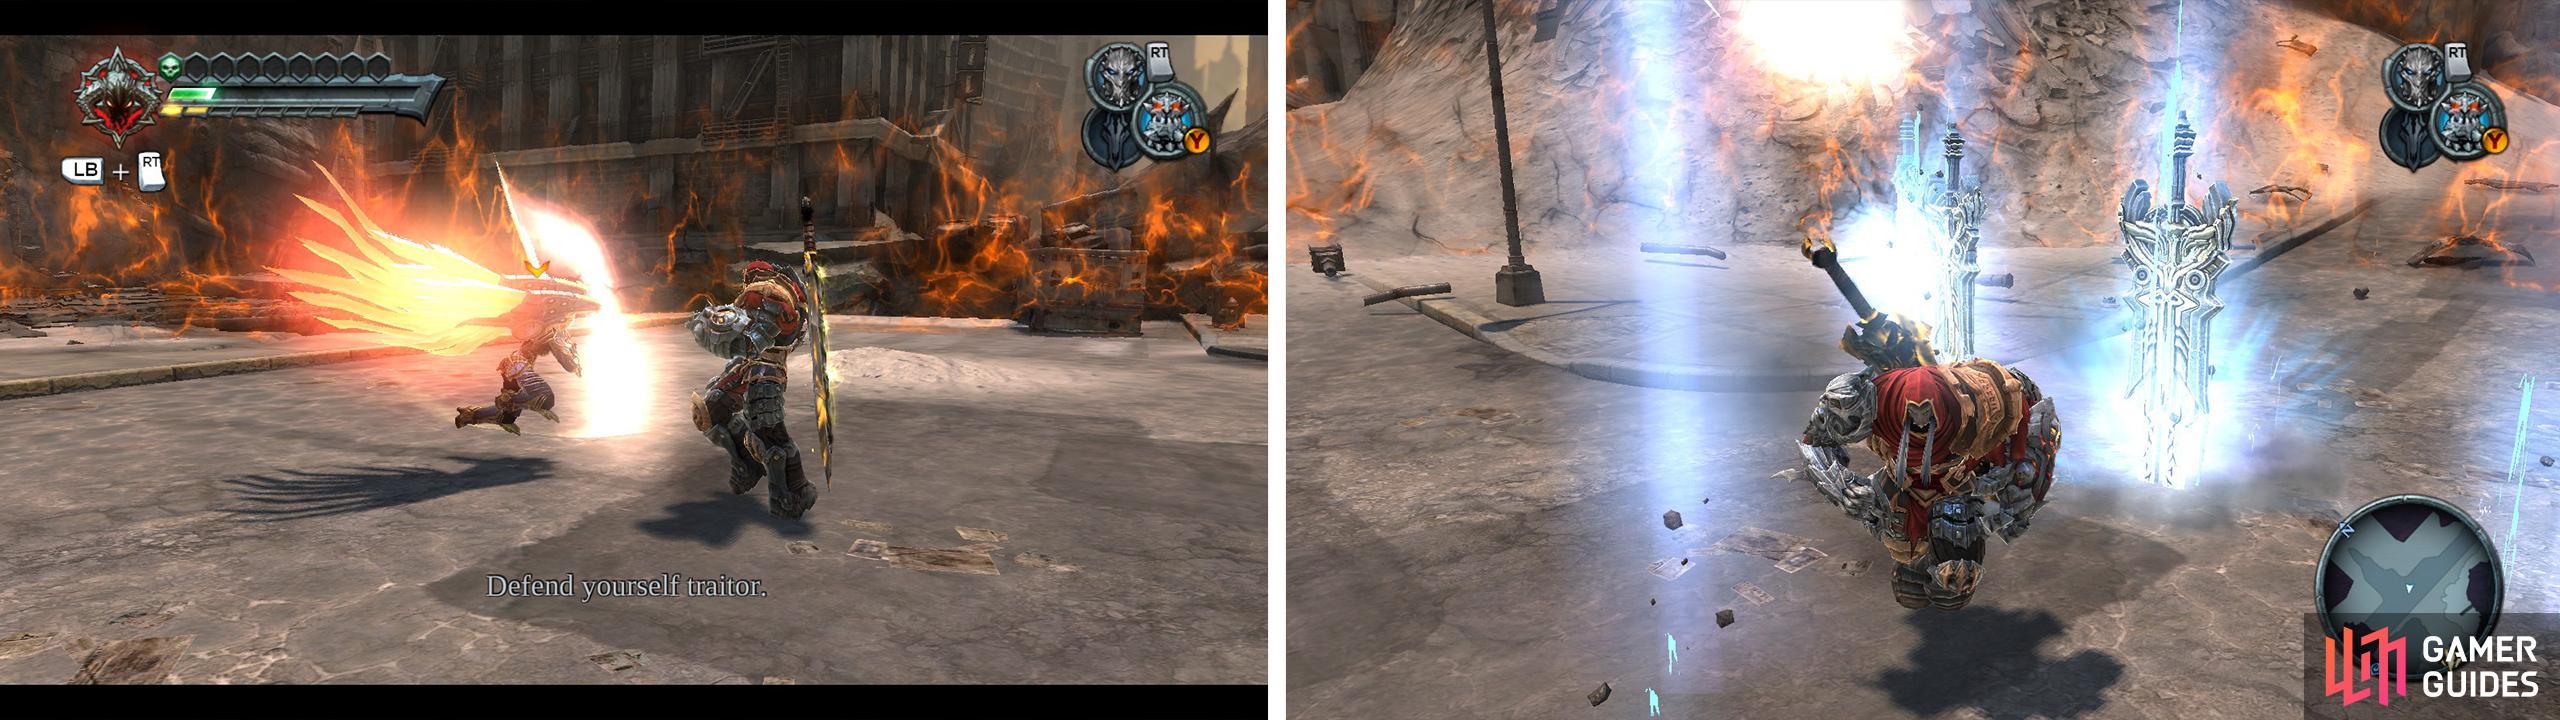 Dodge Uriels attacks (left) and keep moving to avoid the falling blades (right).